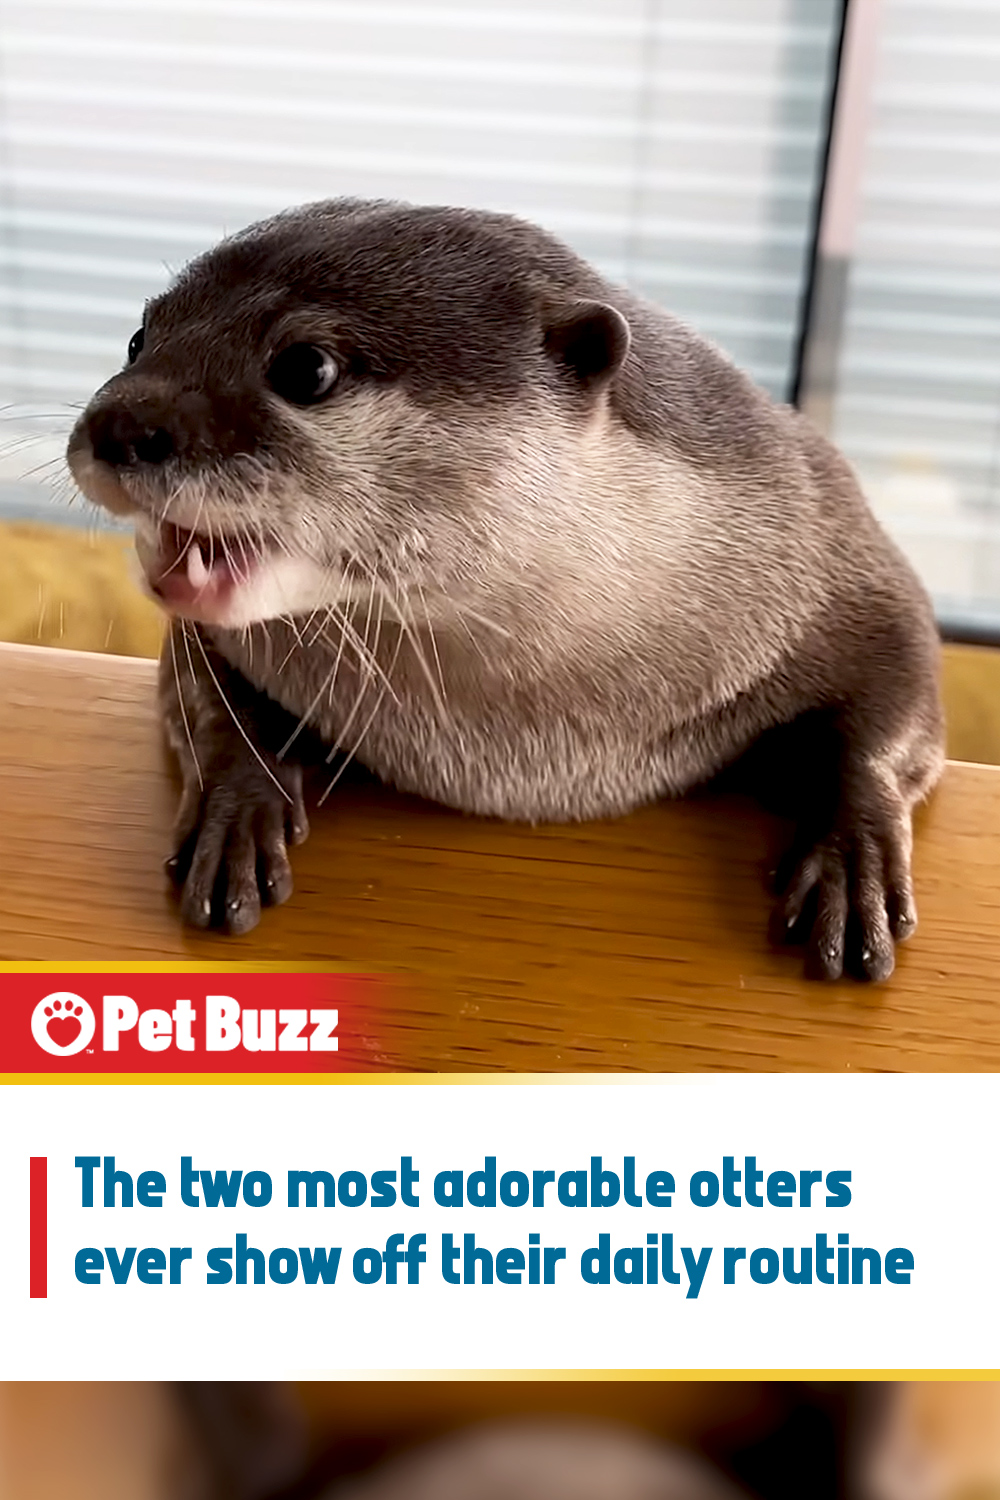 The two most adorable otters ever show off their daily routine